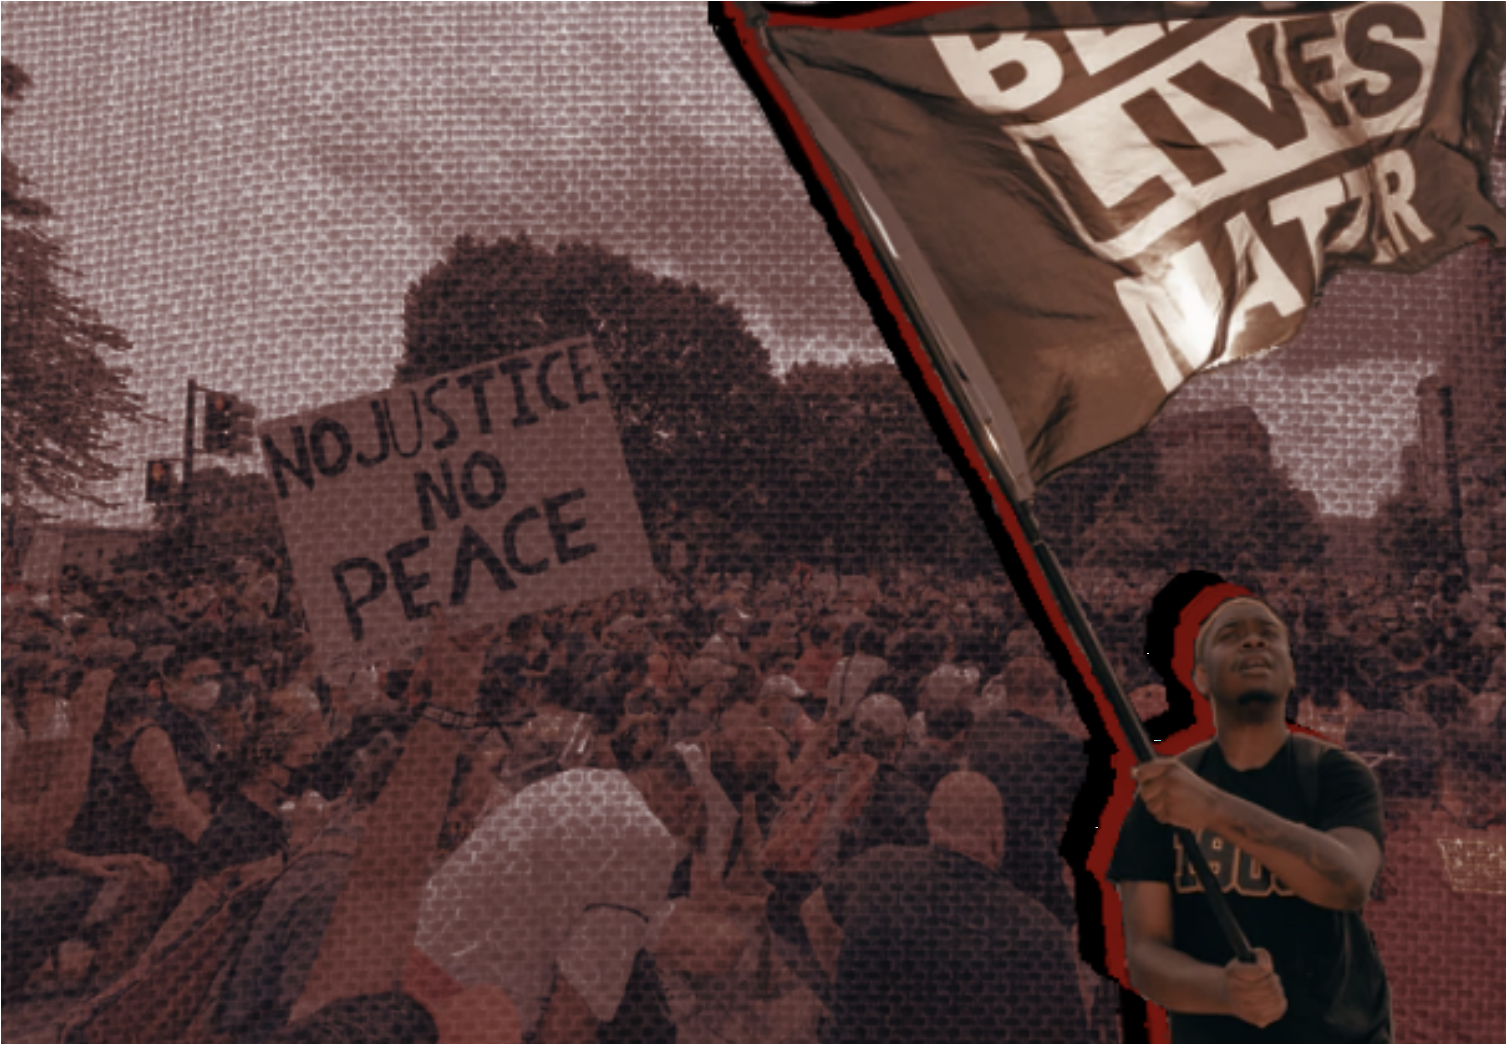 Defining the Abstract: Anti-Blackness and Black Lives Matter